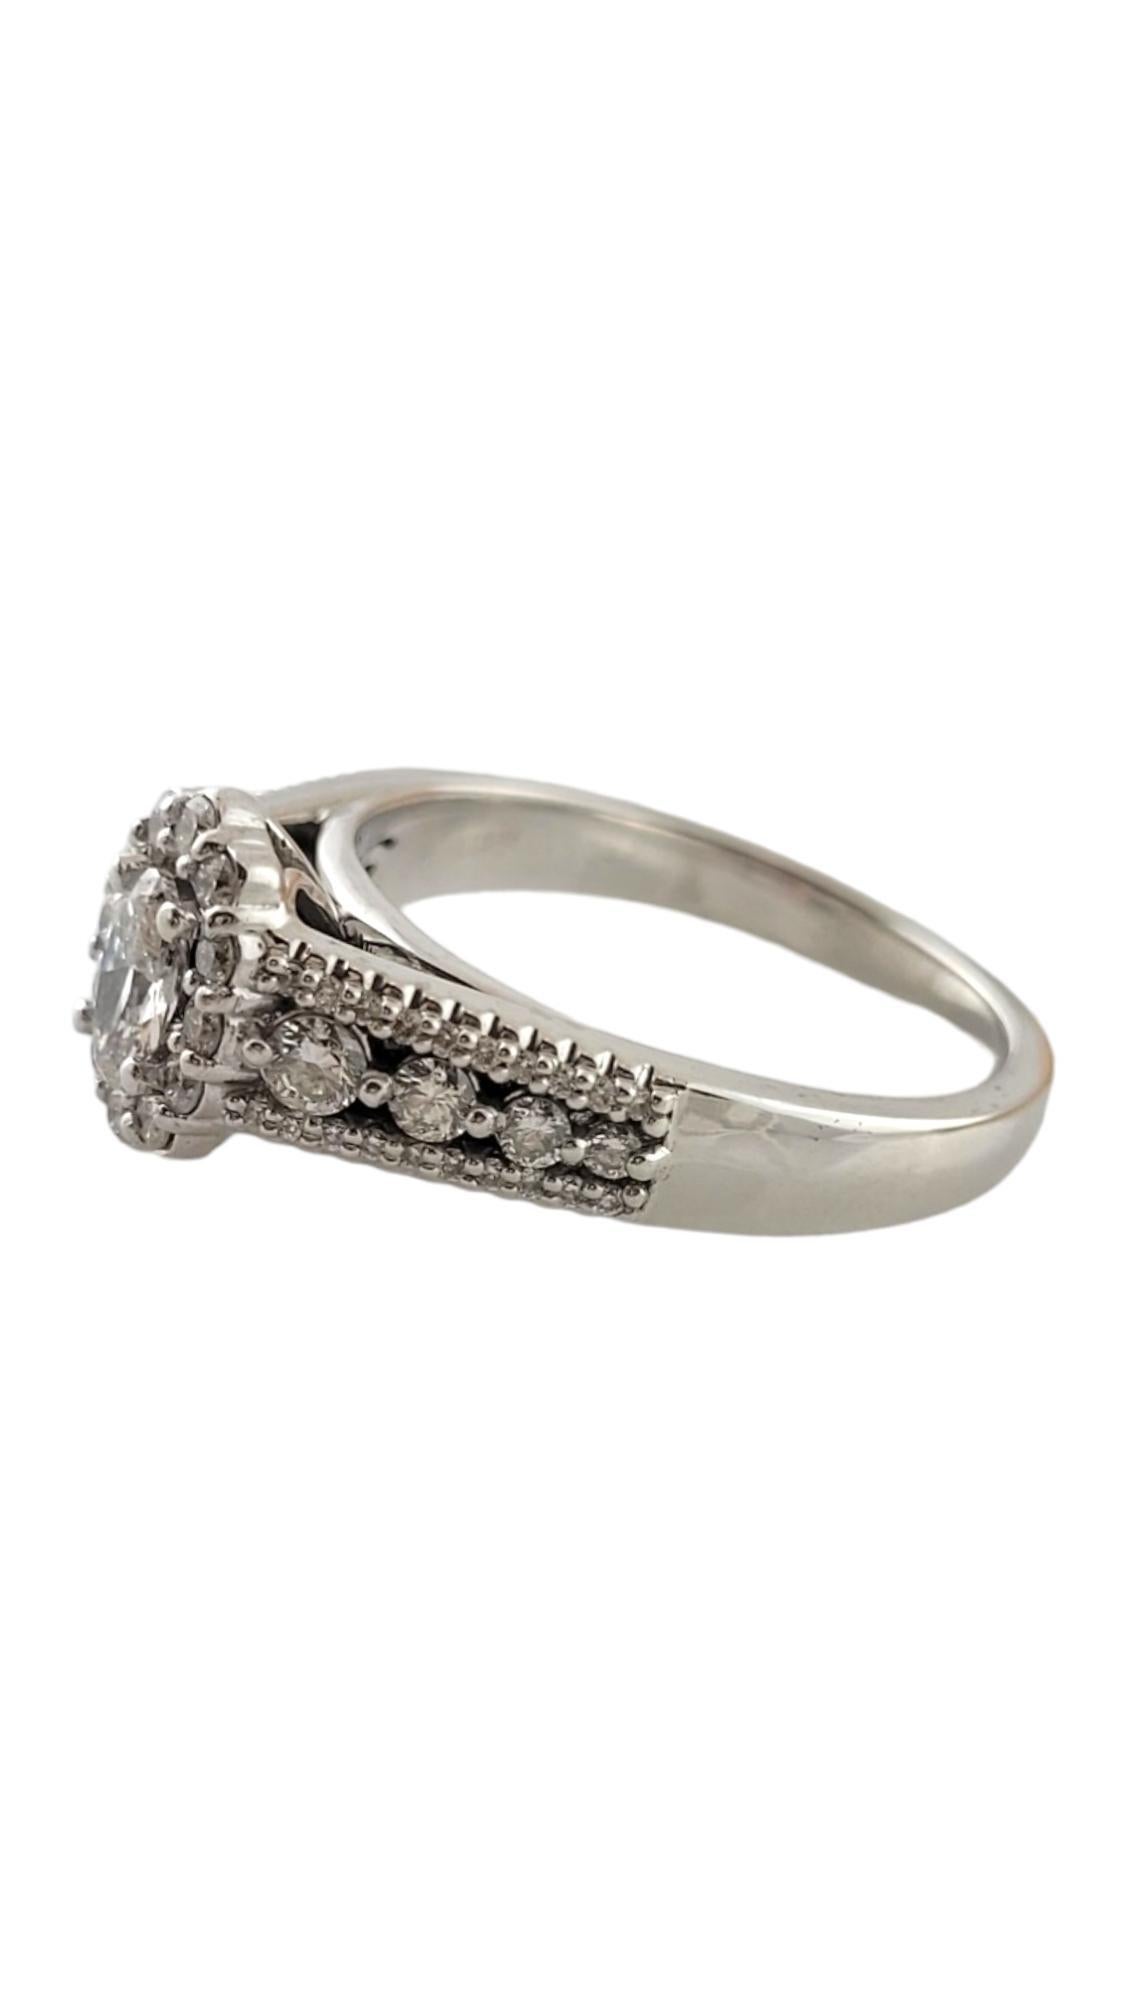 This sparkling engagement ring features one oval cut diamond (.38 ct.) surrounded by 60 round brilliant cut diamonds and set in beautifully detailed 14K white gold.  Shank:  3 mm.

Total diamond weight:  1.0 ct.

Diamond color:  I

Diamond clarity: 